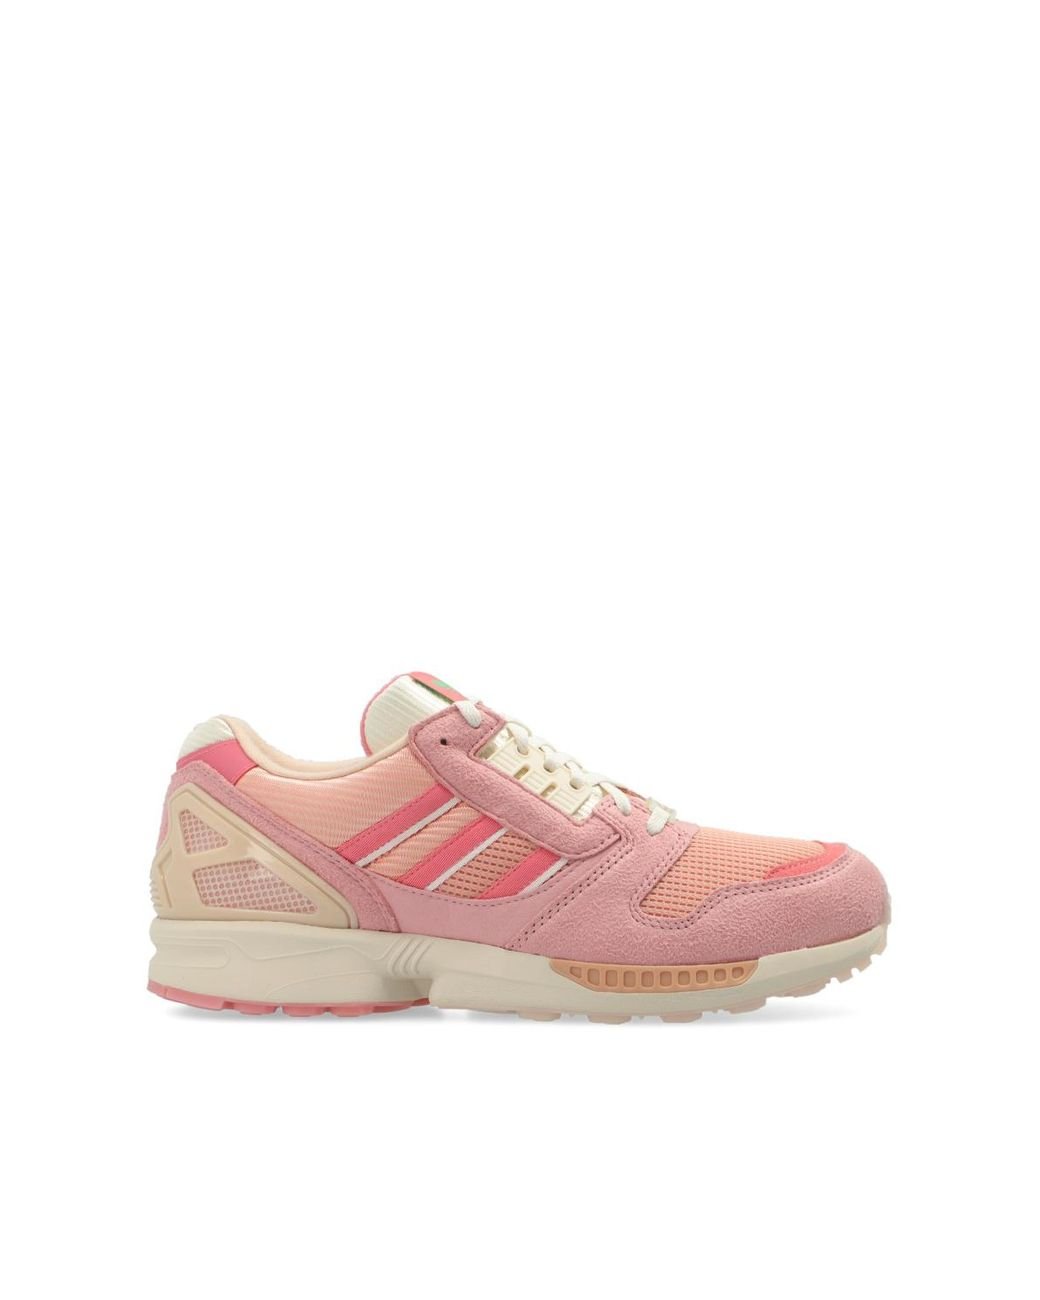 adidas Originals 'zx 8000 Strawberry Latte' Sneakers in Pink for 